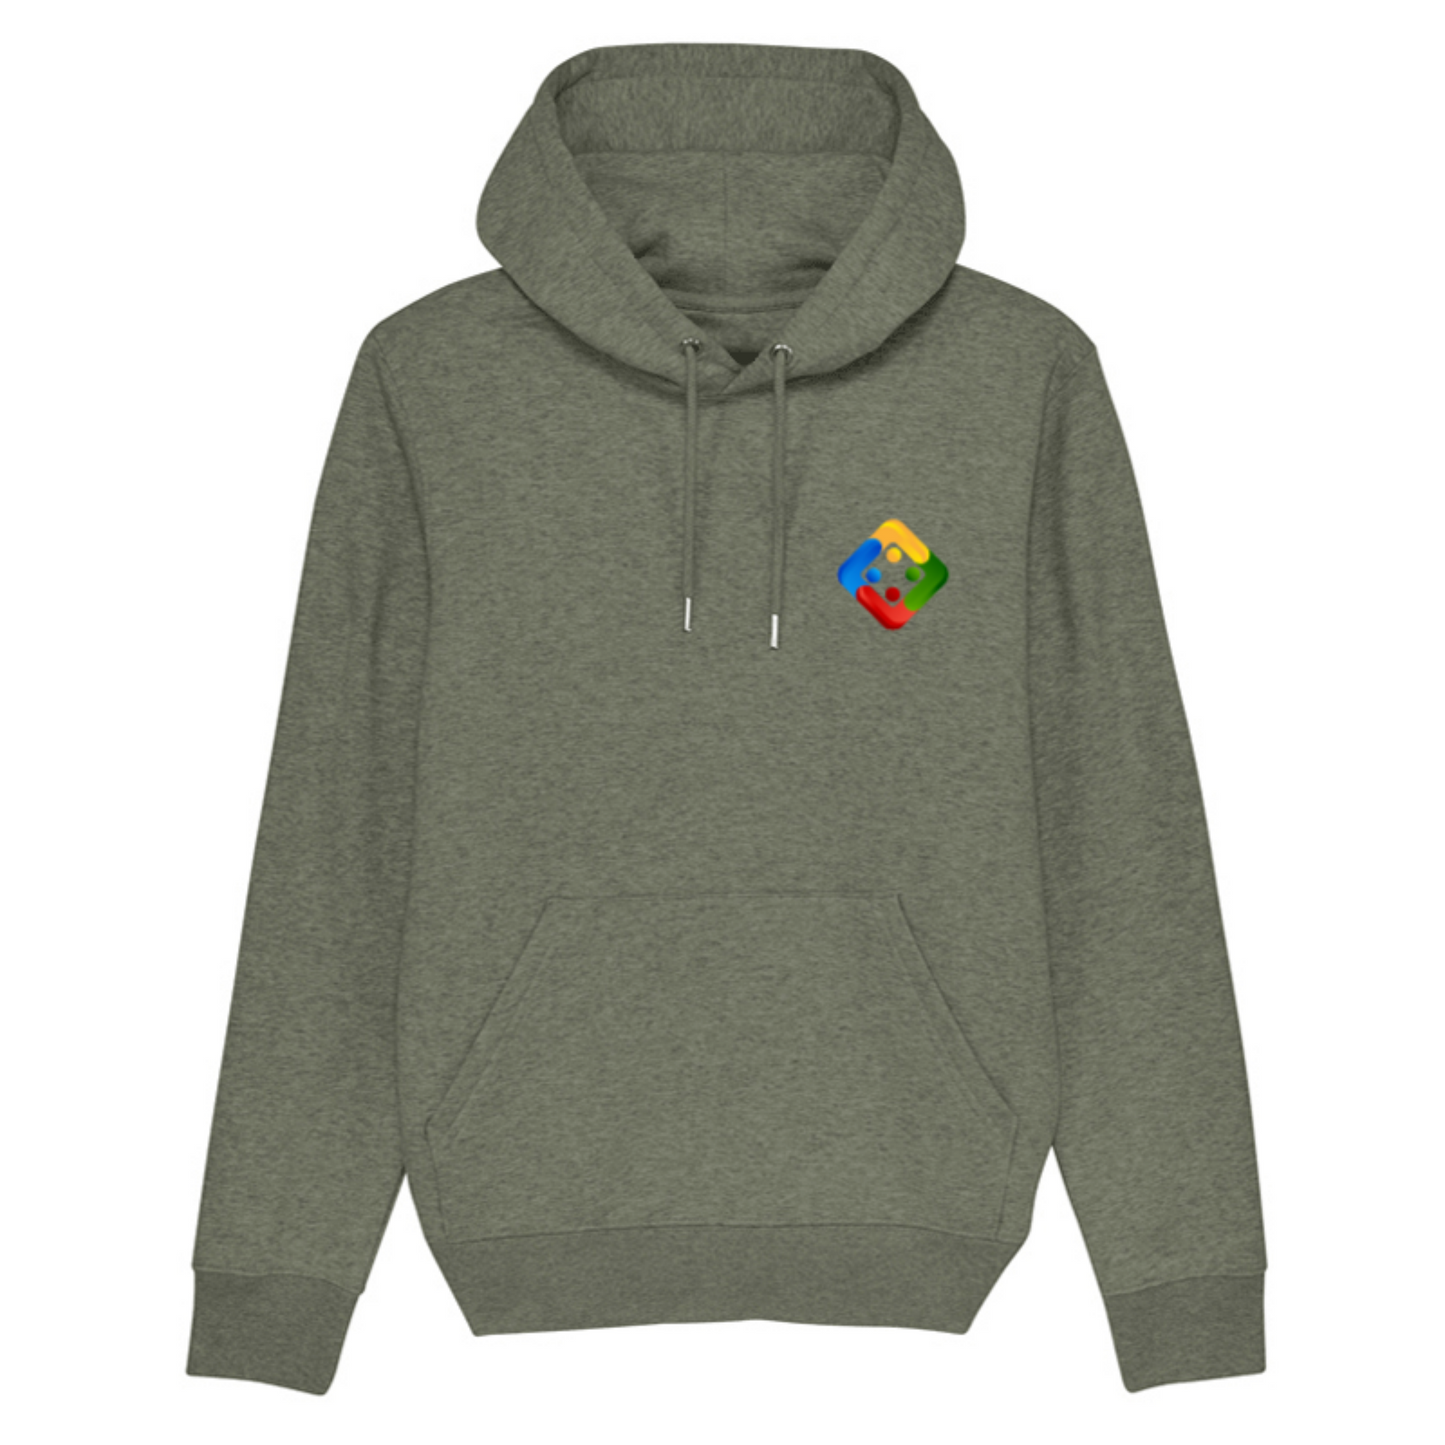 Unisex organic heavyweight hoodie with embroidered Uckers emblem. Available in 7 colours.